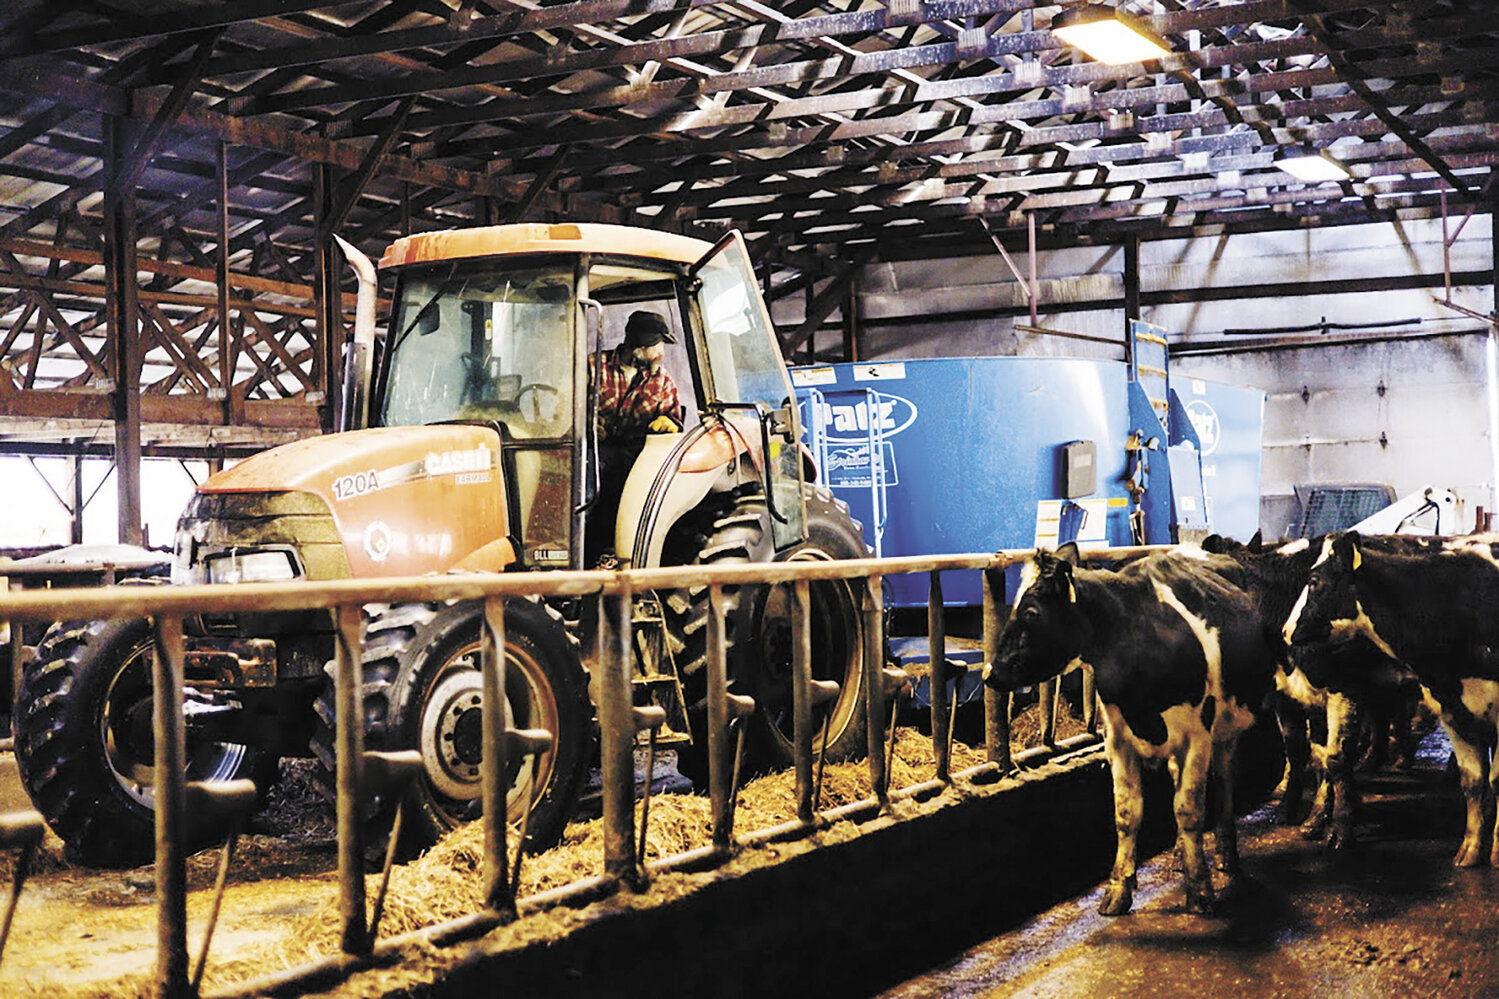 Randy Dornbusch drives a tractor to feed the heifers Feb. 27, 2022, at the farm near Perham, Minnesota. Dornbusch runs the farm with the help of his wife, Wendy, and daughter, Carolyn. Wendy’s children, Annalee and Nathaniel, helped when they lived at the farm.